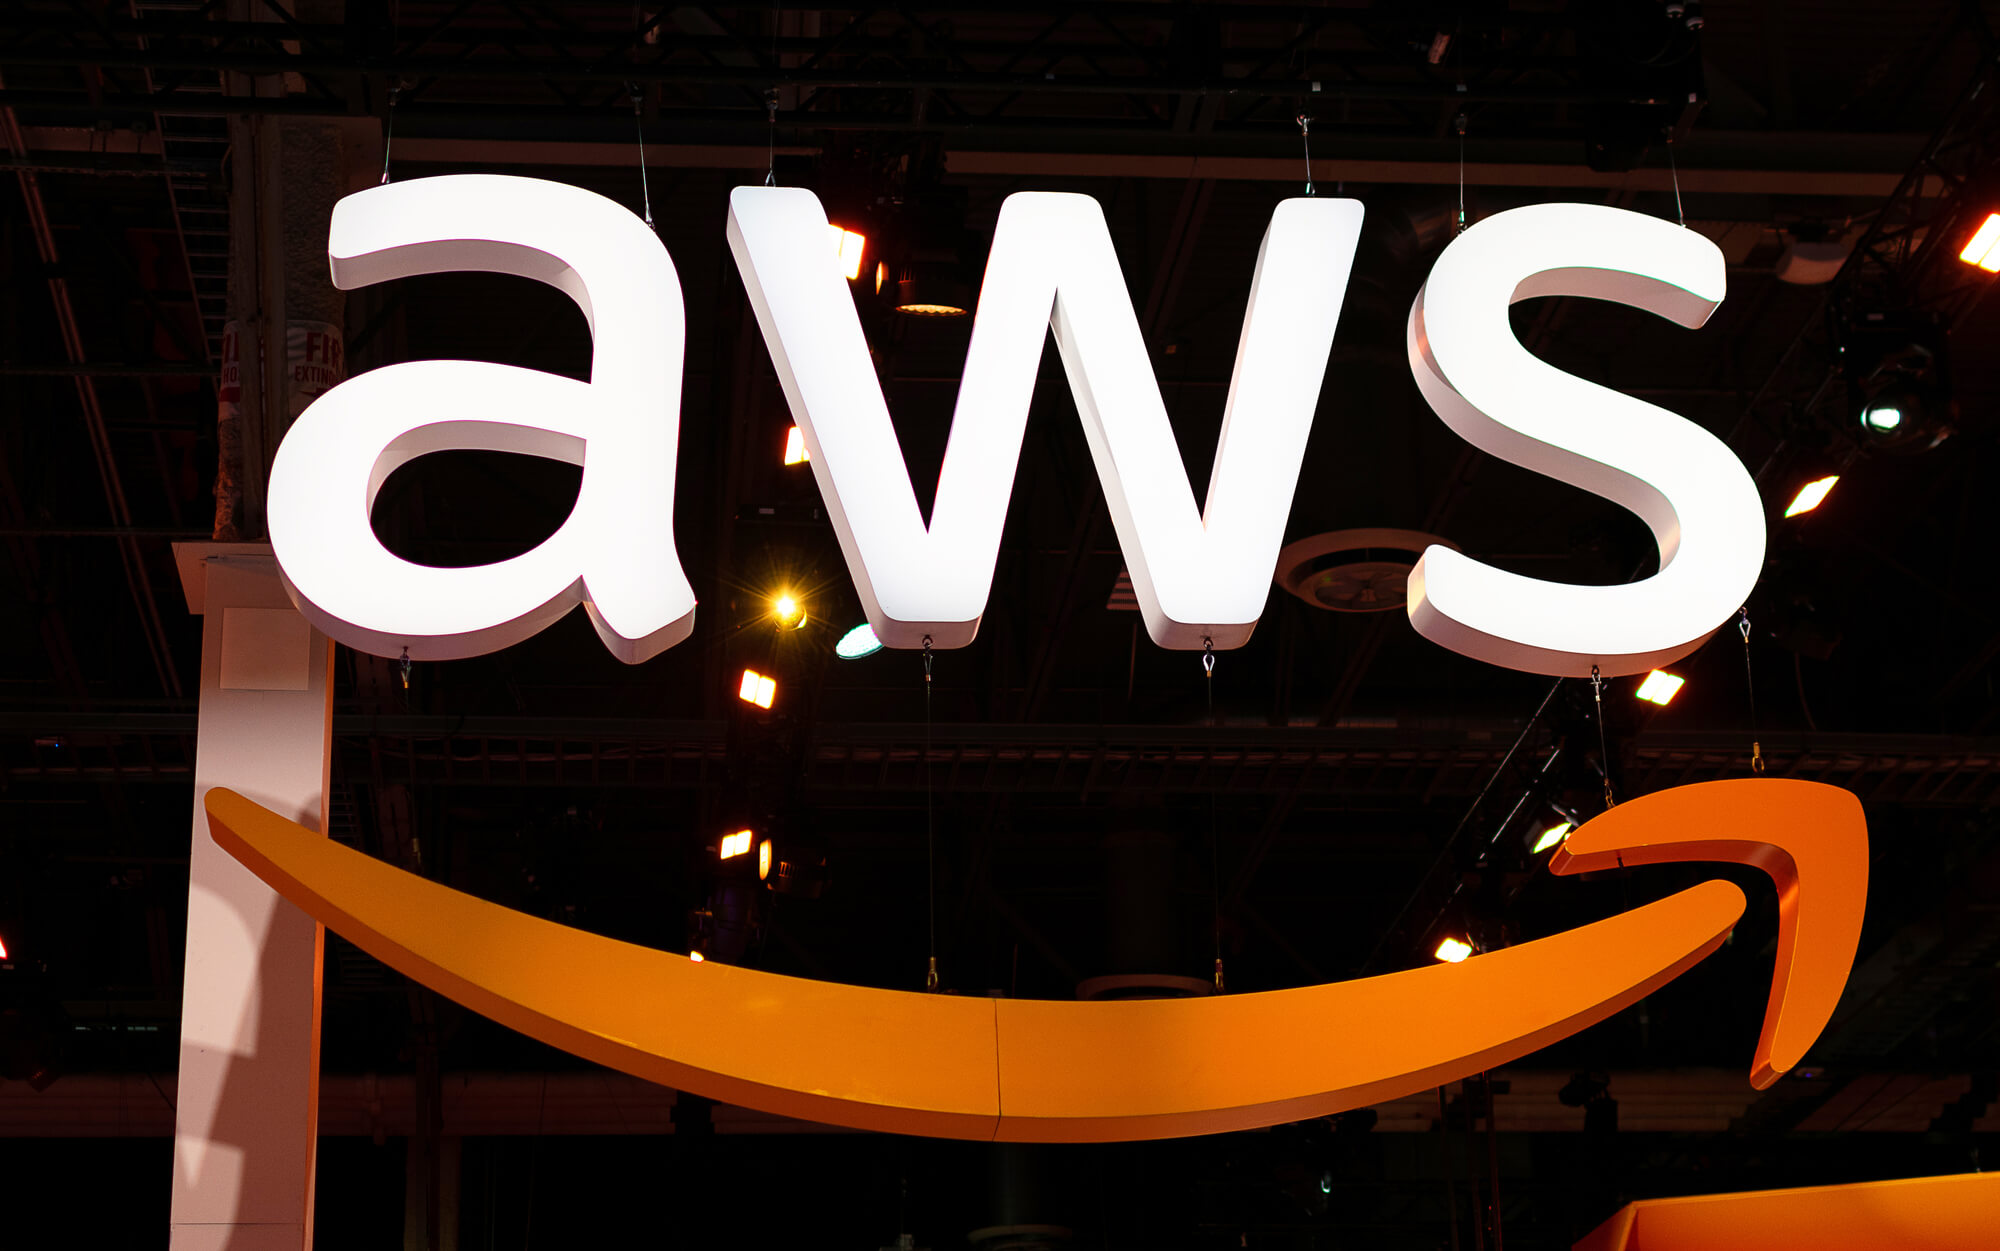 The Evolution of AWS: From a Simple Storage Service to a Cloud Computing Giant